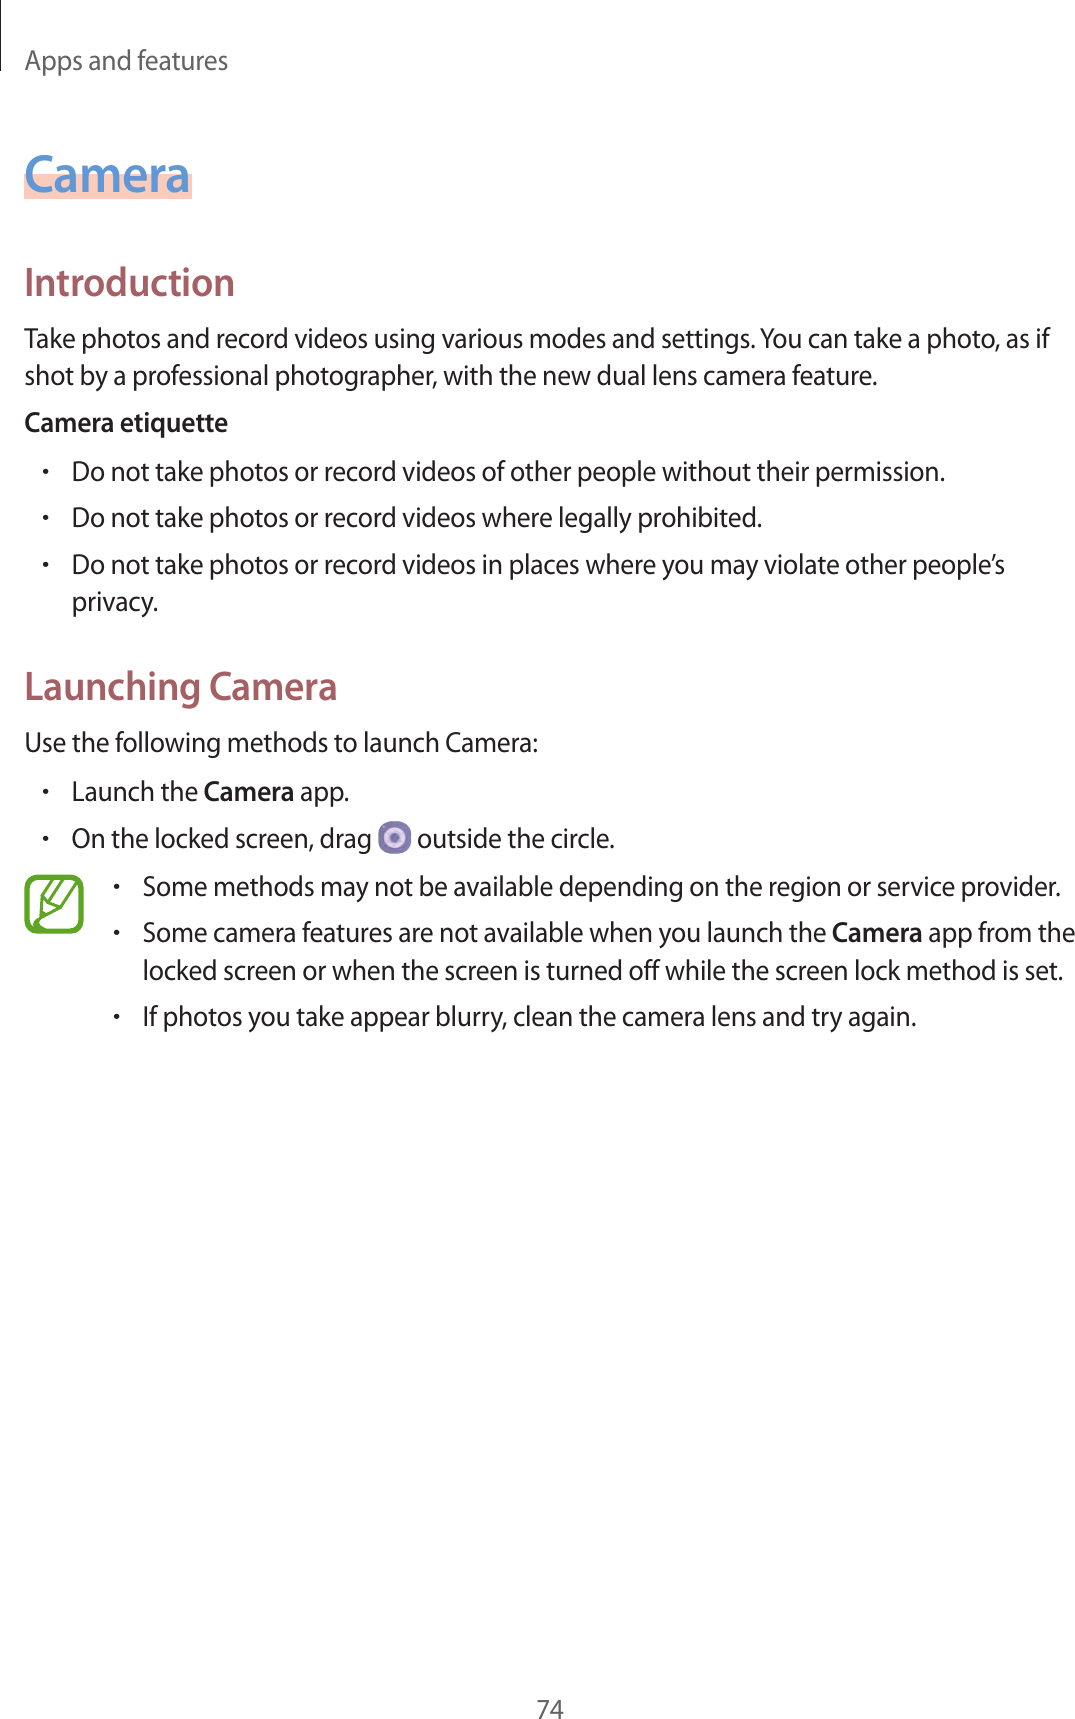 Apps and features74CameraIntroductionTake photos and record videos using various modes and settings. You can take a photo, as if shot by a professional photographer, with the new dual lens camera feature.Camera etiquette•Do not take photos or record videos of other people without their permission.•Do not take photos or record videos where legally prohibited.•Do not take photos or record videos in places where you may violate other people’s privacy.Launching CameraUse the following methods to launch Camera:•Launch the Camera app.•On the locked screen, drag   outside the circle.•Some methods may not be available depending on the region or service provider.•Some camera features are not available when you launch the Camera app from the locked screen or when the screen is turned off while the screen lock method is set.•If photos you take appear blurry, clean the camera lens and try again.